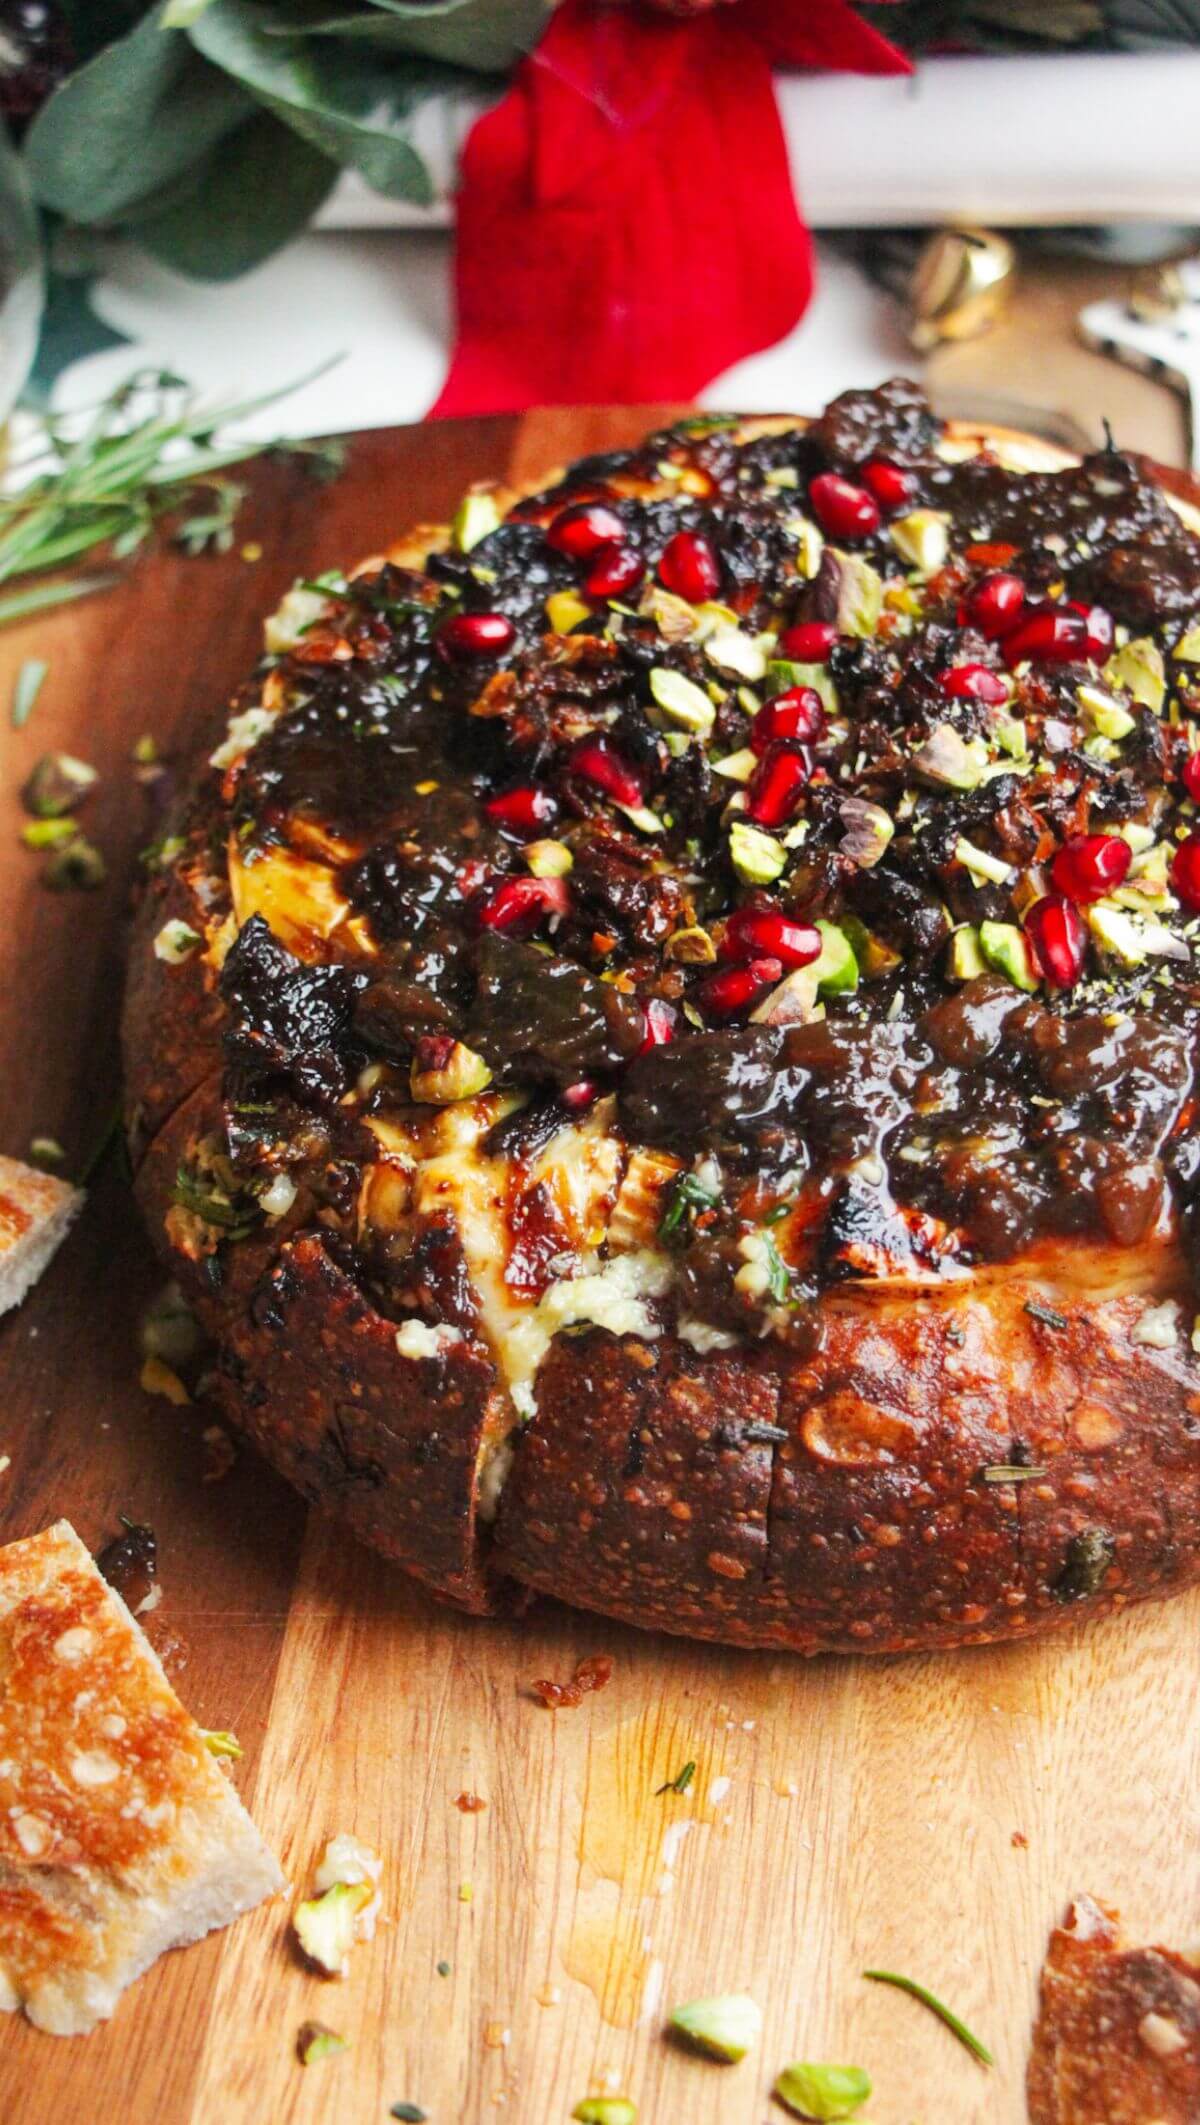 Baked brie in a loaf of bread, topped with fig jam and pomegranate seeds.